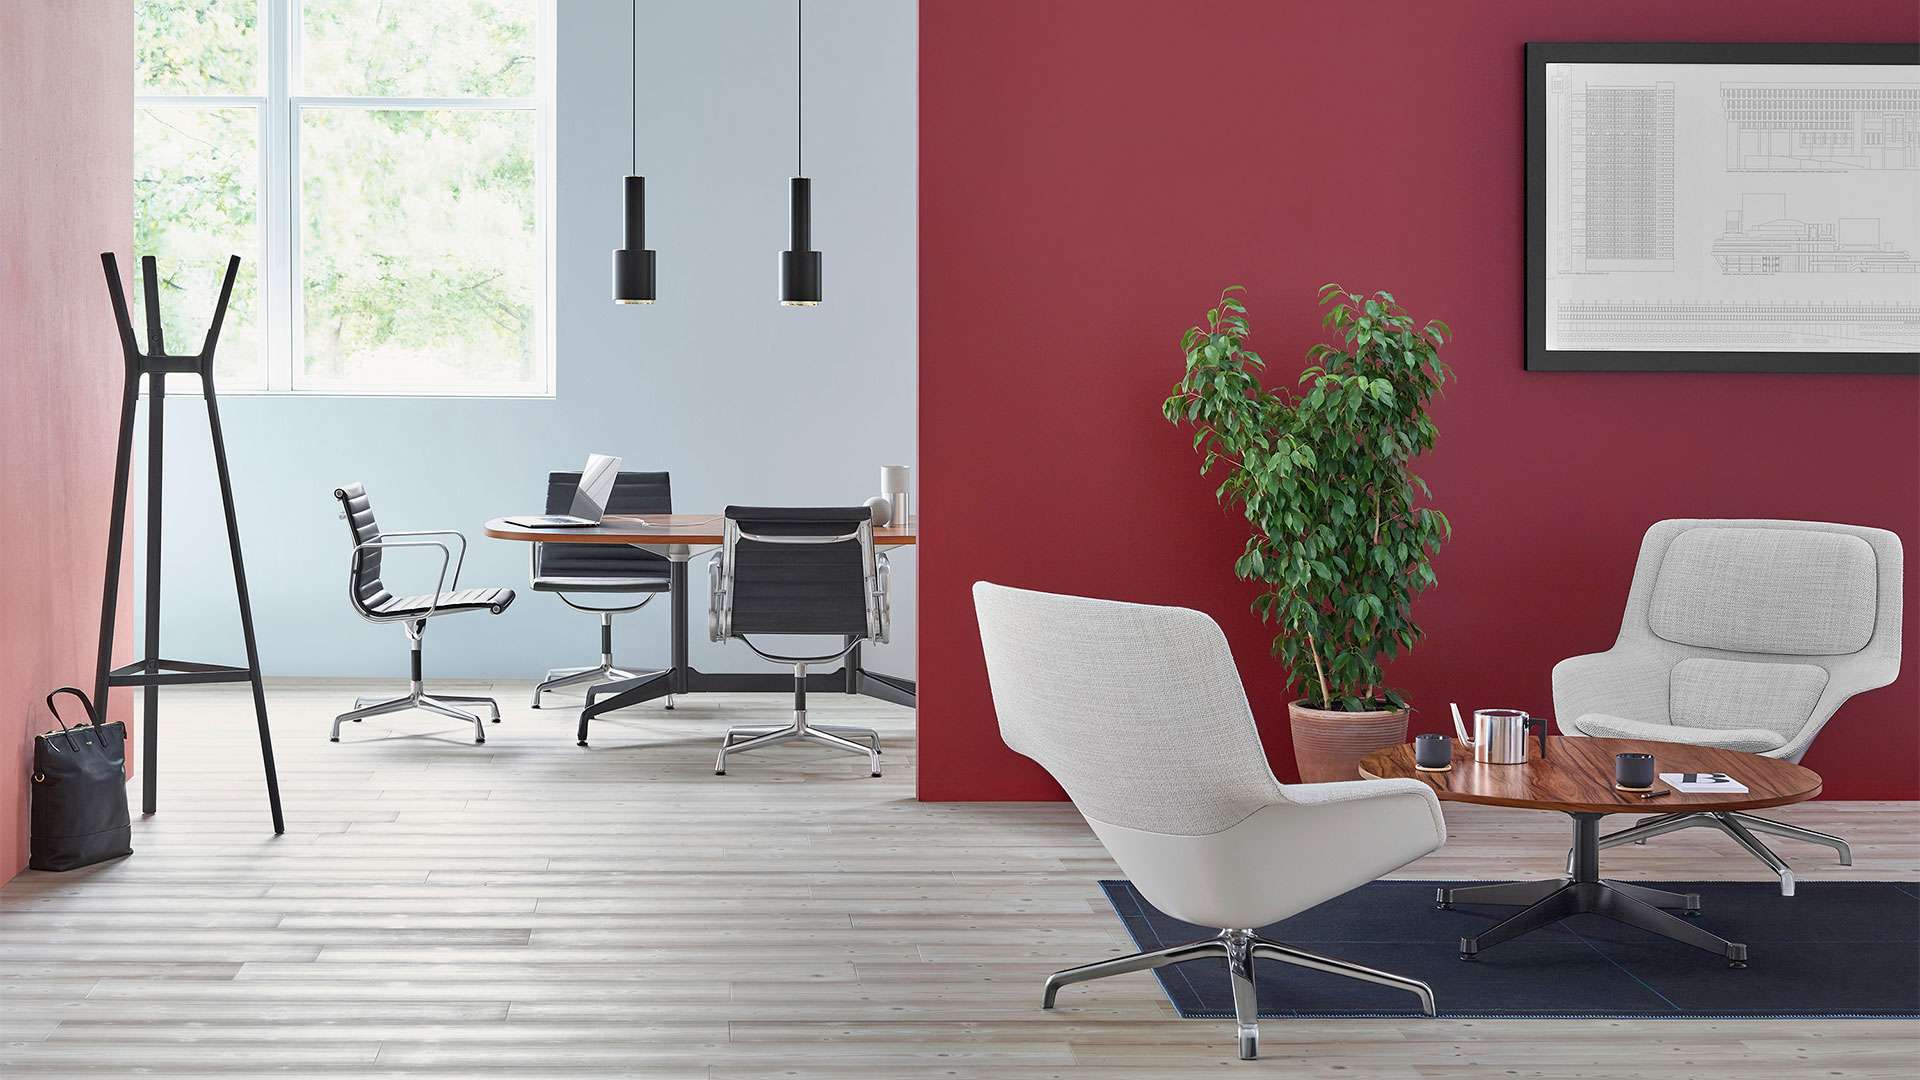 Eames Tables, Contract Base, Lifestyle